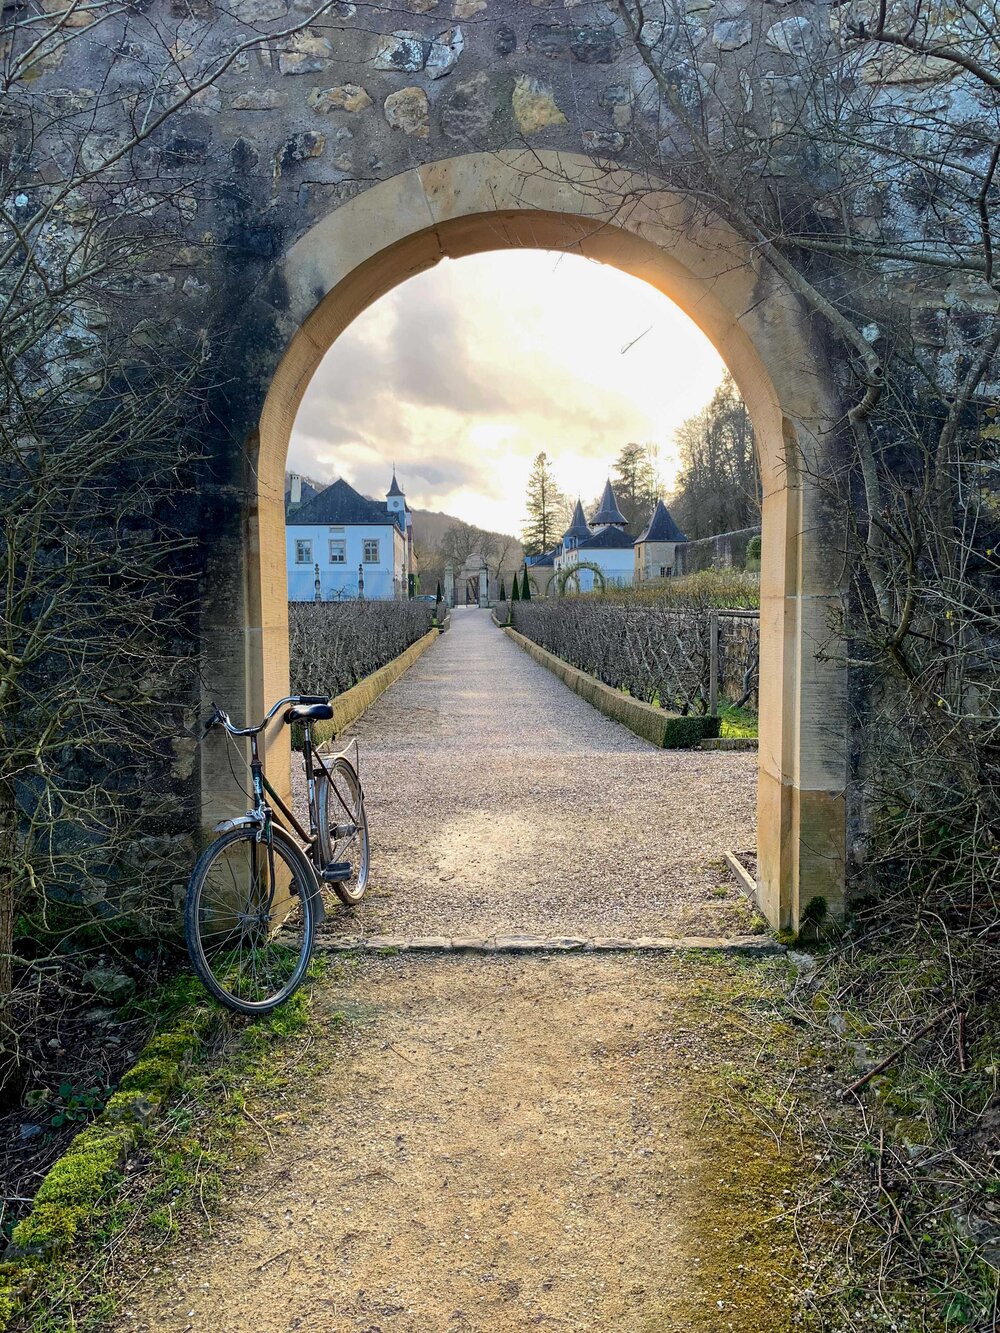 Bicycle & Archway Looking into the Gardens at Ansembourg Castle in Luxembourg.jpg